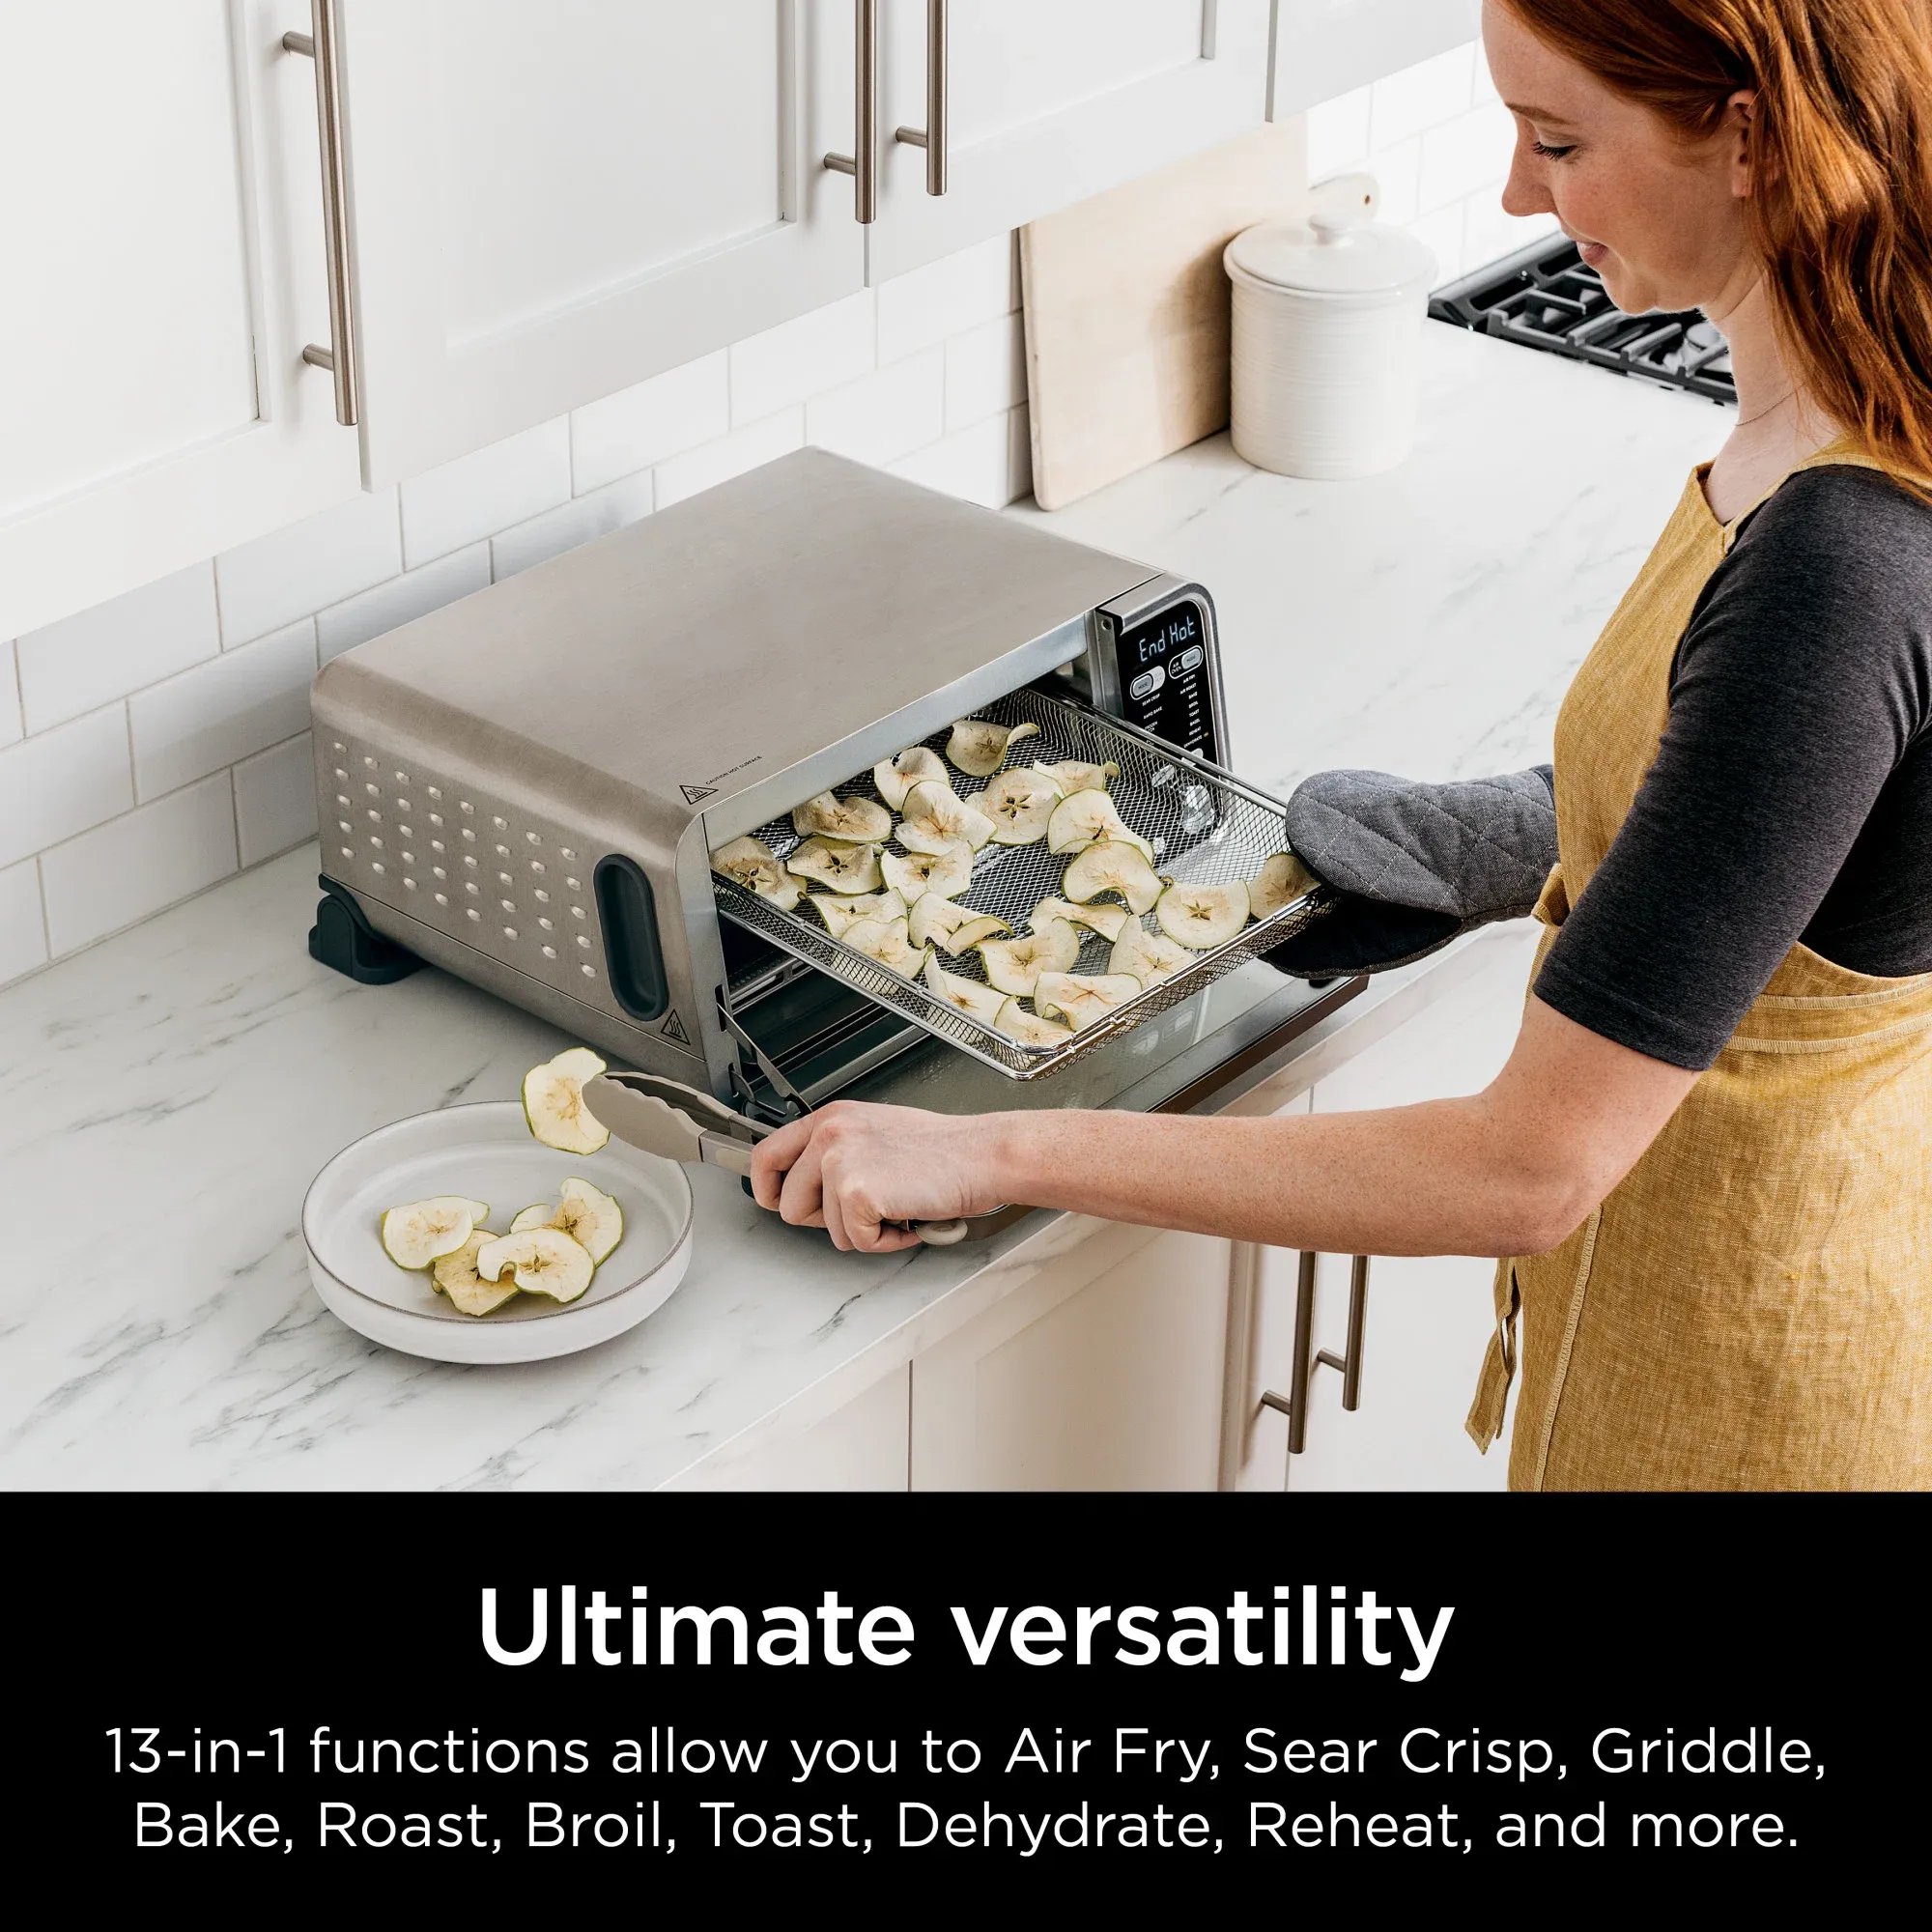 Ninja SP301 Dual Heat Air Fry Countertop 13-in-1 Oven with Extended Height， XL Capacity， Flip Up and Away Capability for Storage Space， with Air Fry Basket， SearPlate， Wire Rack and Crumb Tray， Silver